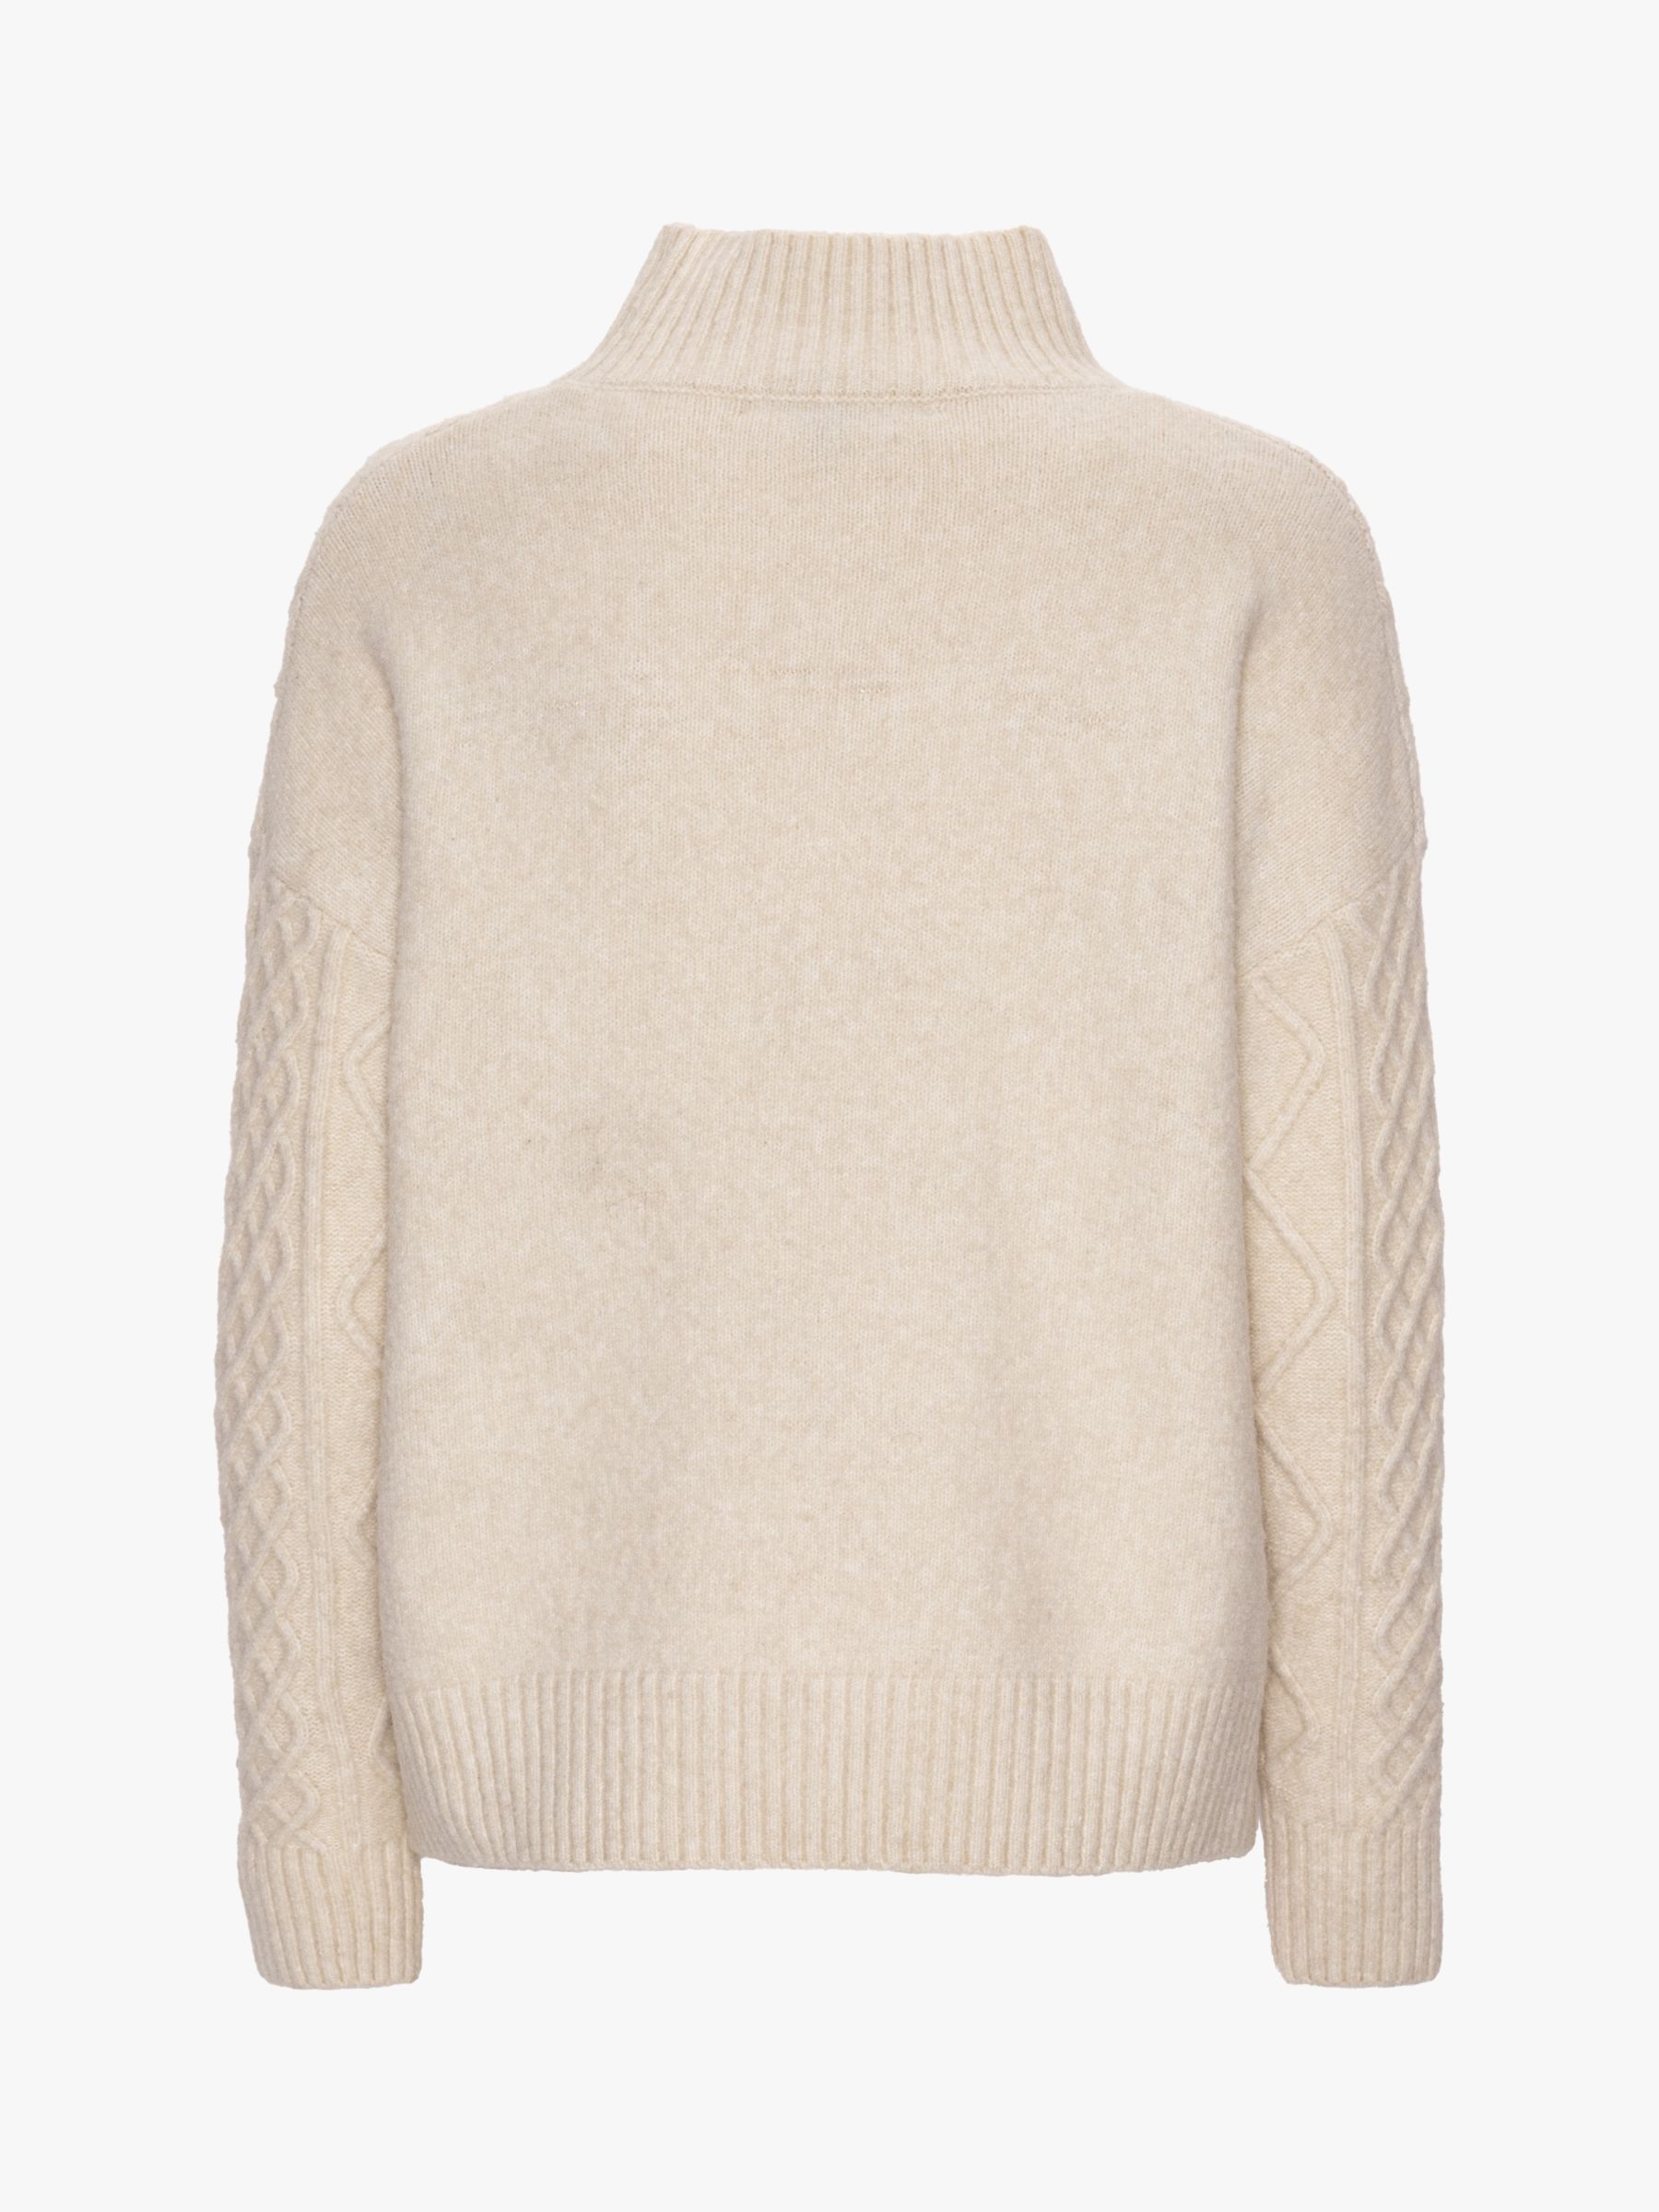 A-VIEW Uvenas Knitted High Neck Jumper, Off White at John Lewis & Partners